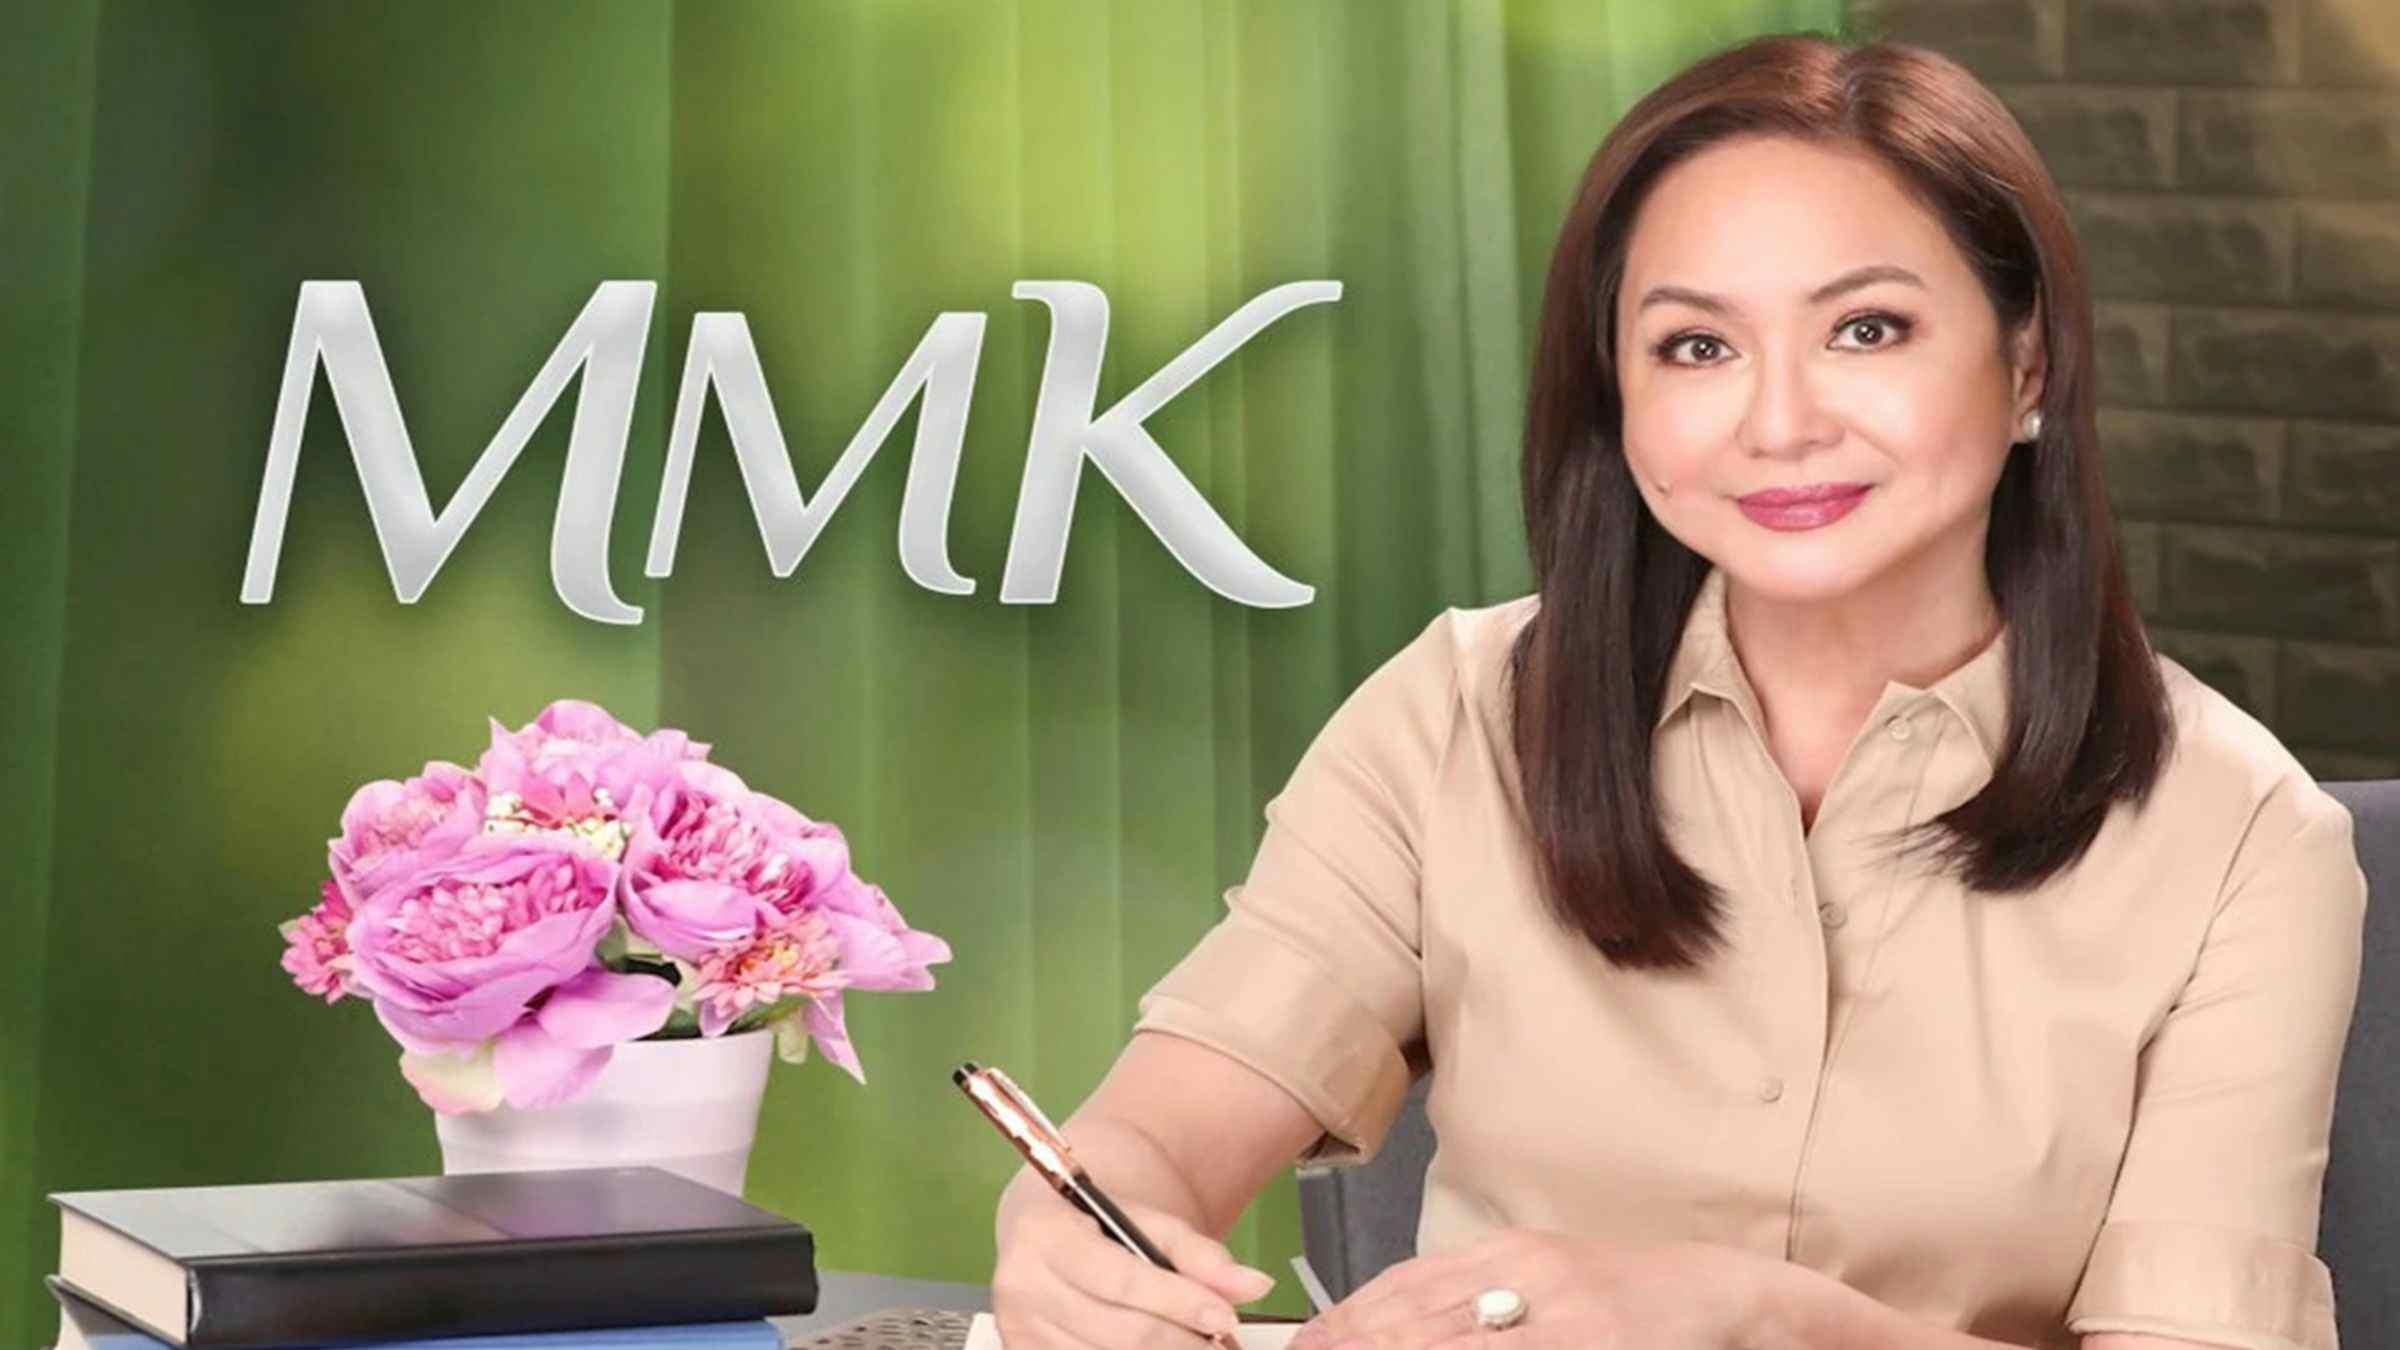 After 3 decades, MMK to air its finale on December 10